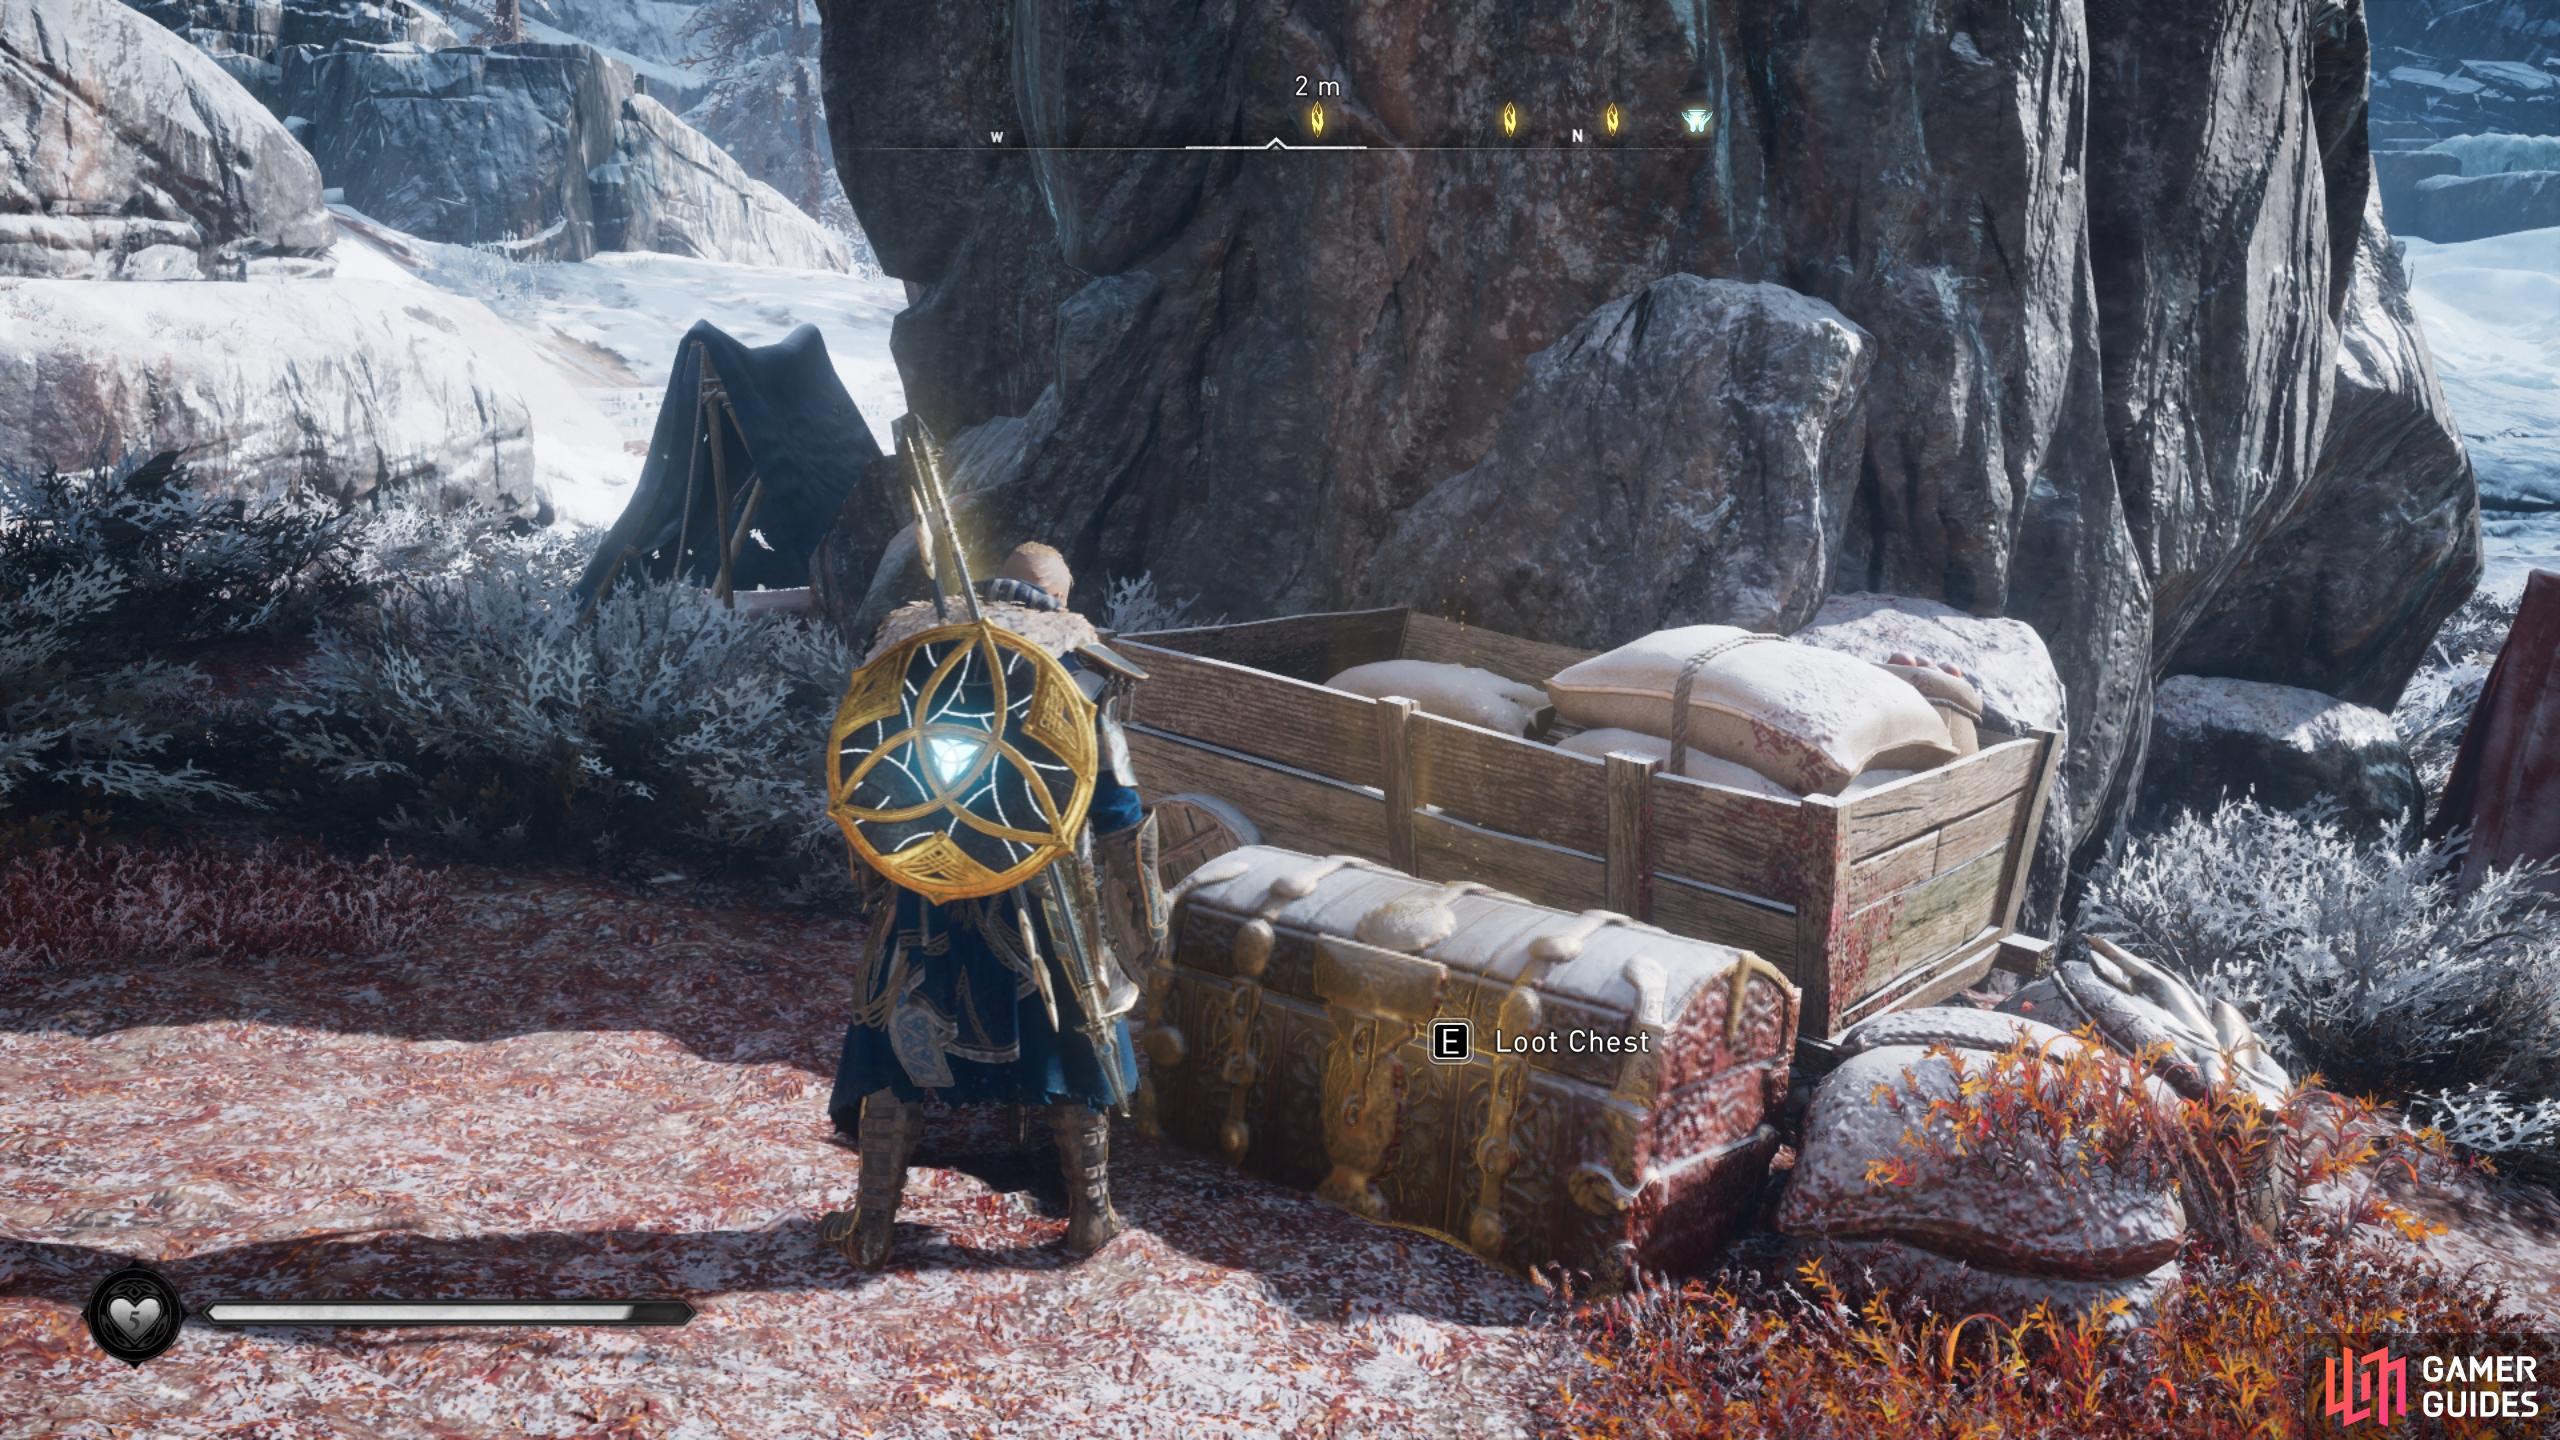 The chest can be found beneath a canopy attached to a large rock.